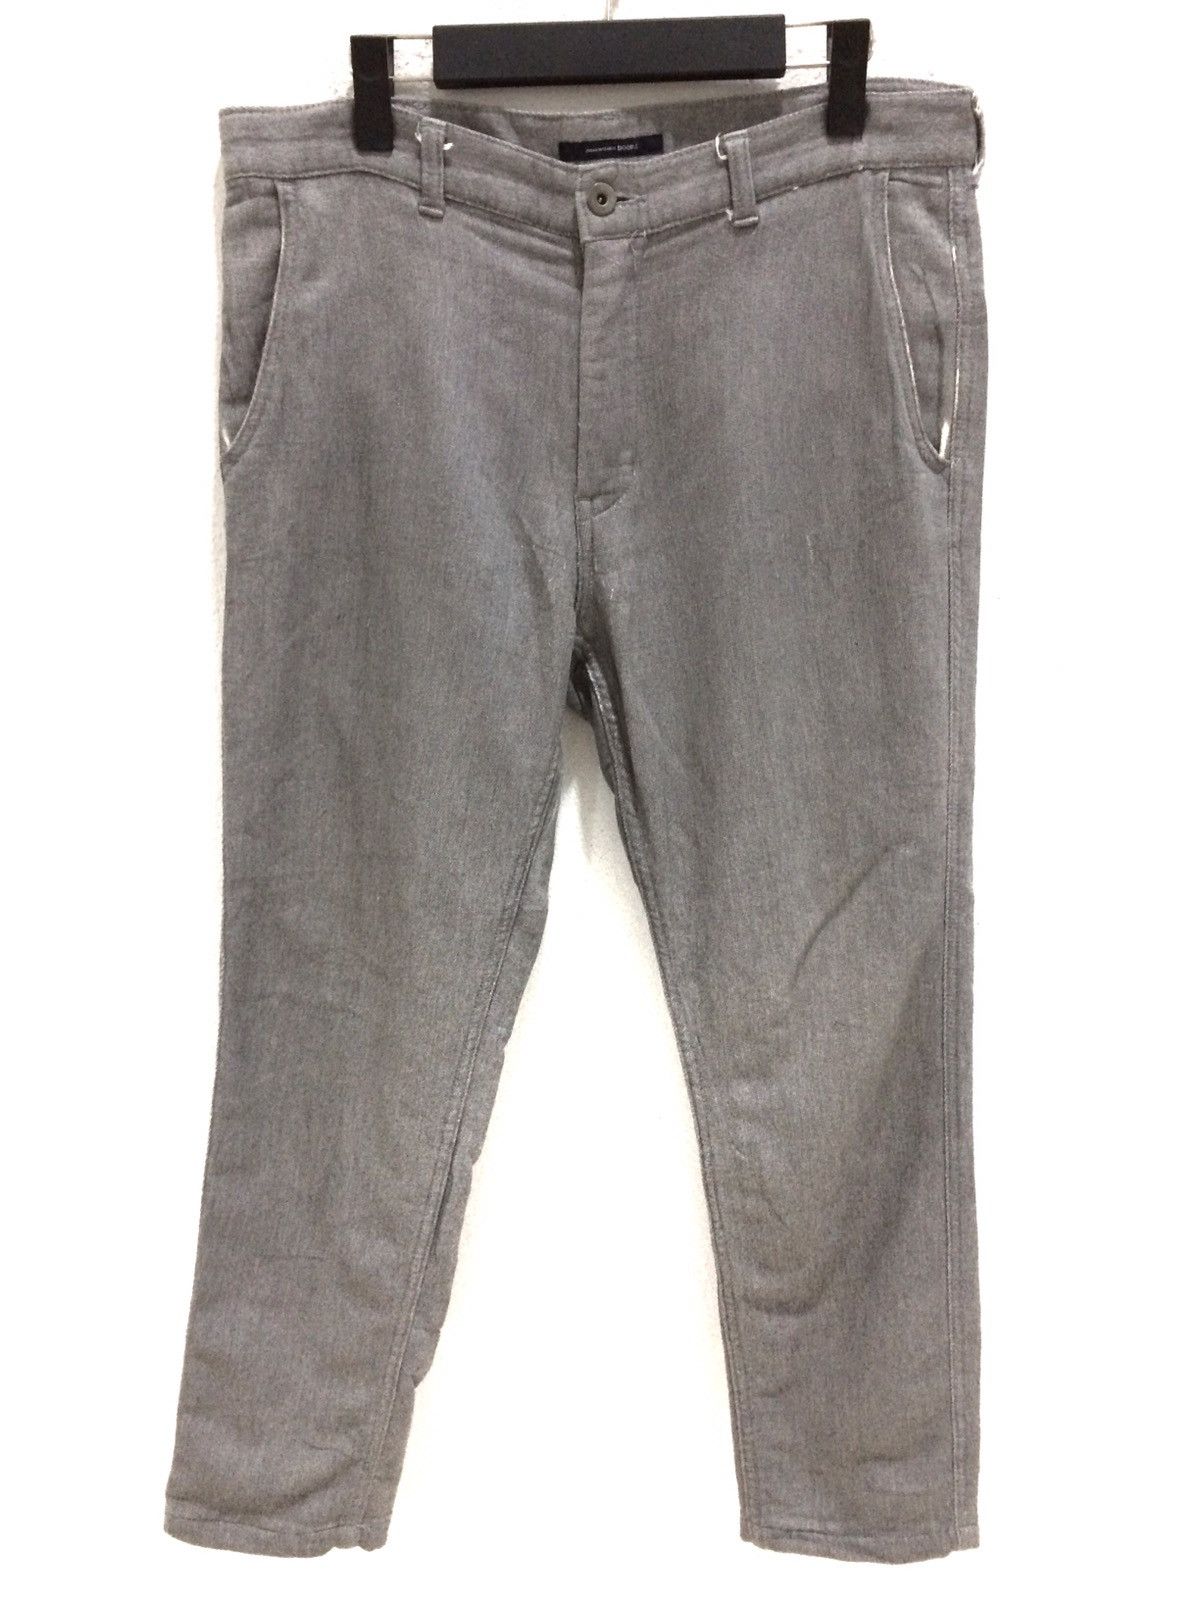 Urban Research Doors URBAN RESEARCH DOORS Trousers Casual Pant | Grailed